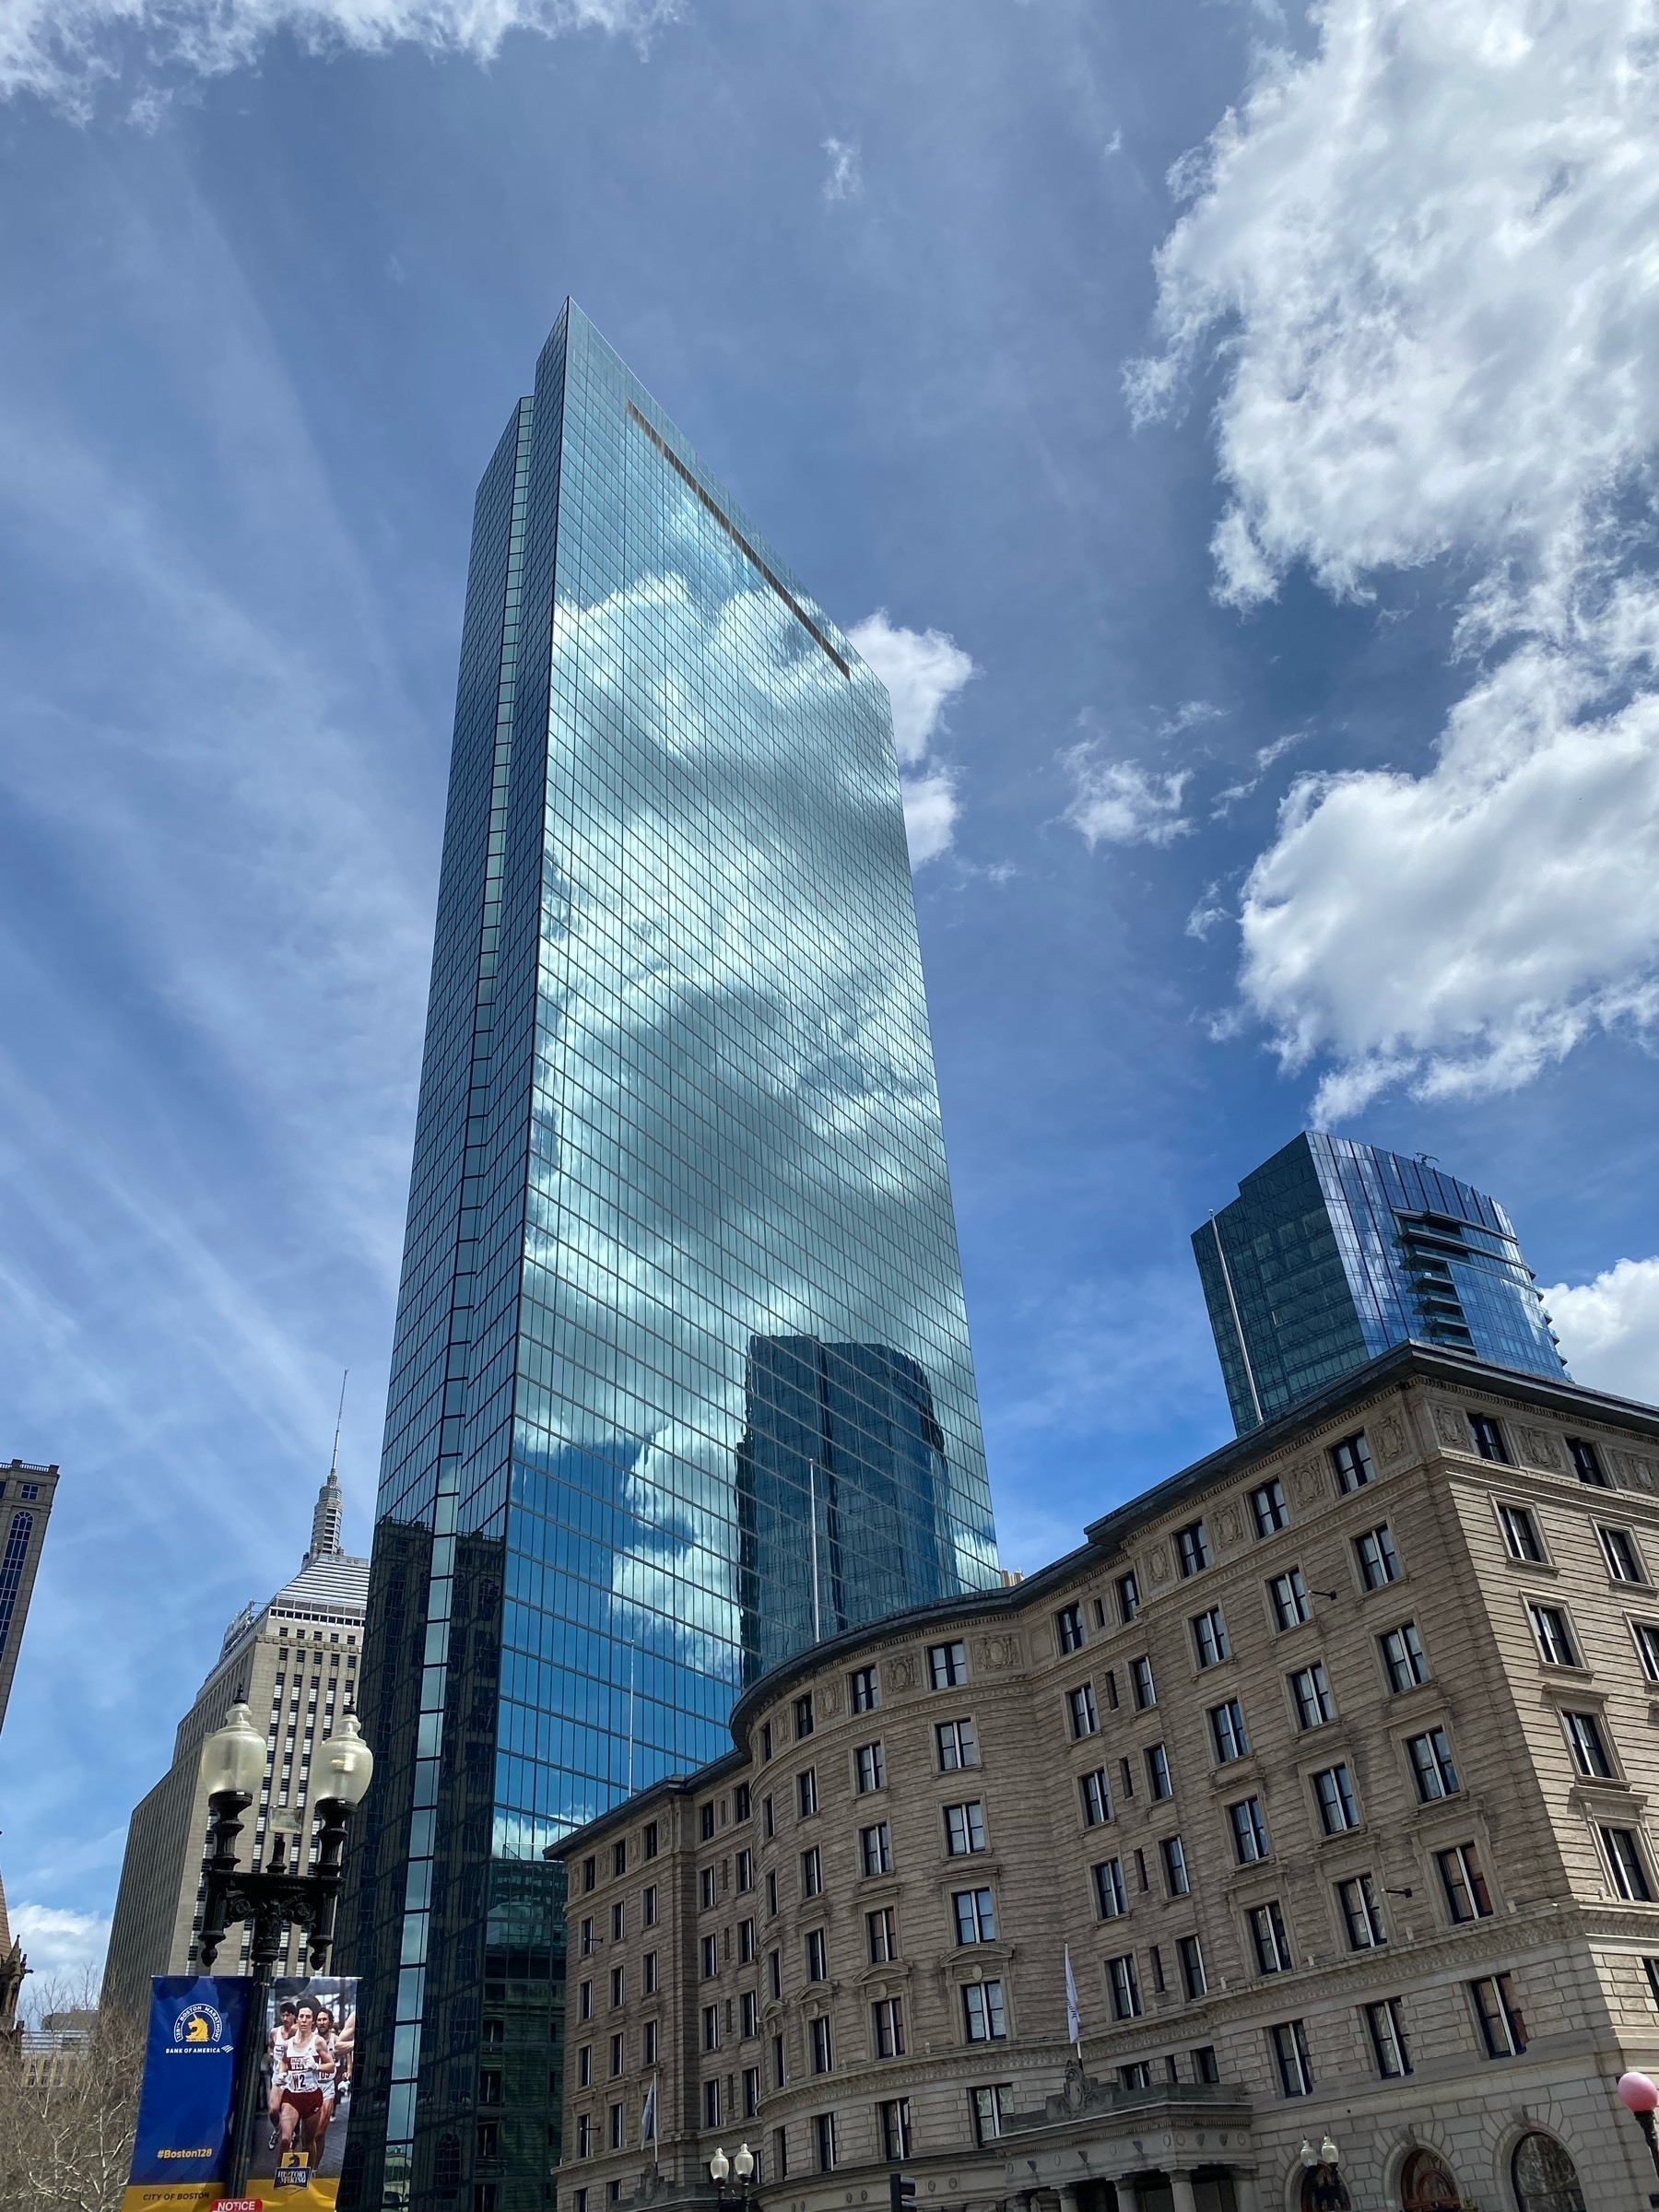 View of the Hancock skyscraper in Copley Square, Boston, with backlit clouds reflected from the windows and the blue sky behind.